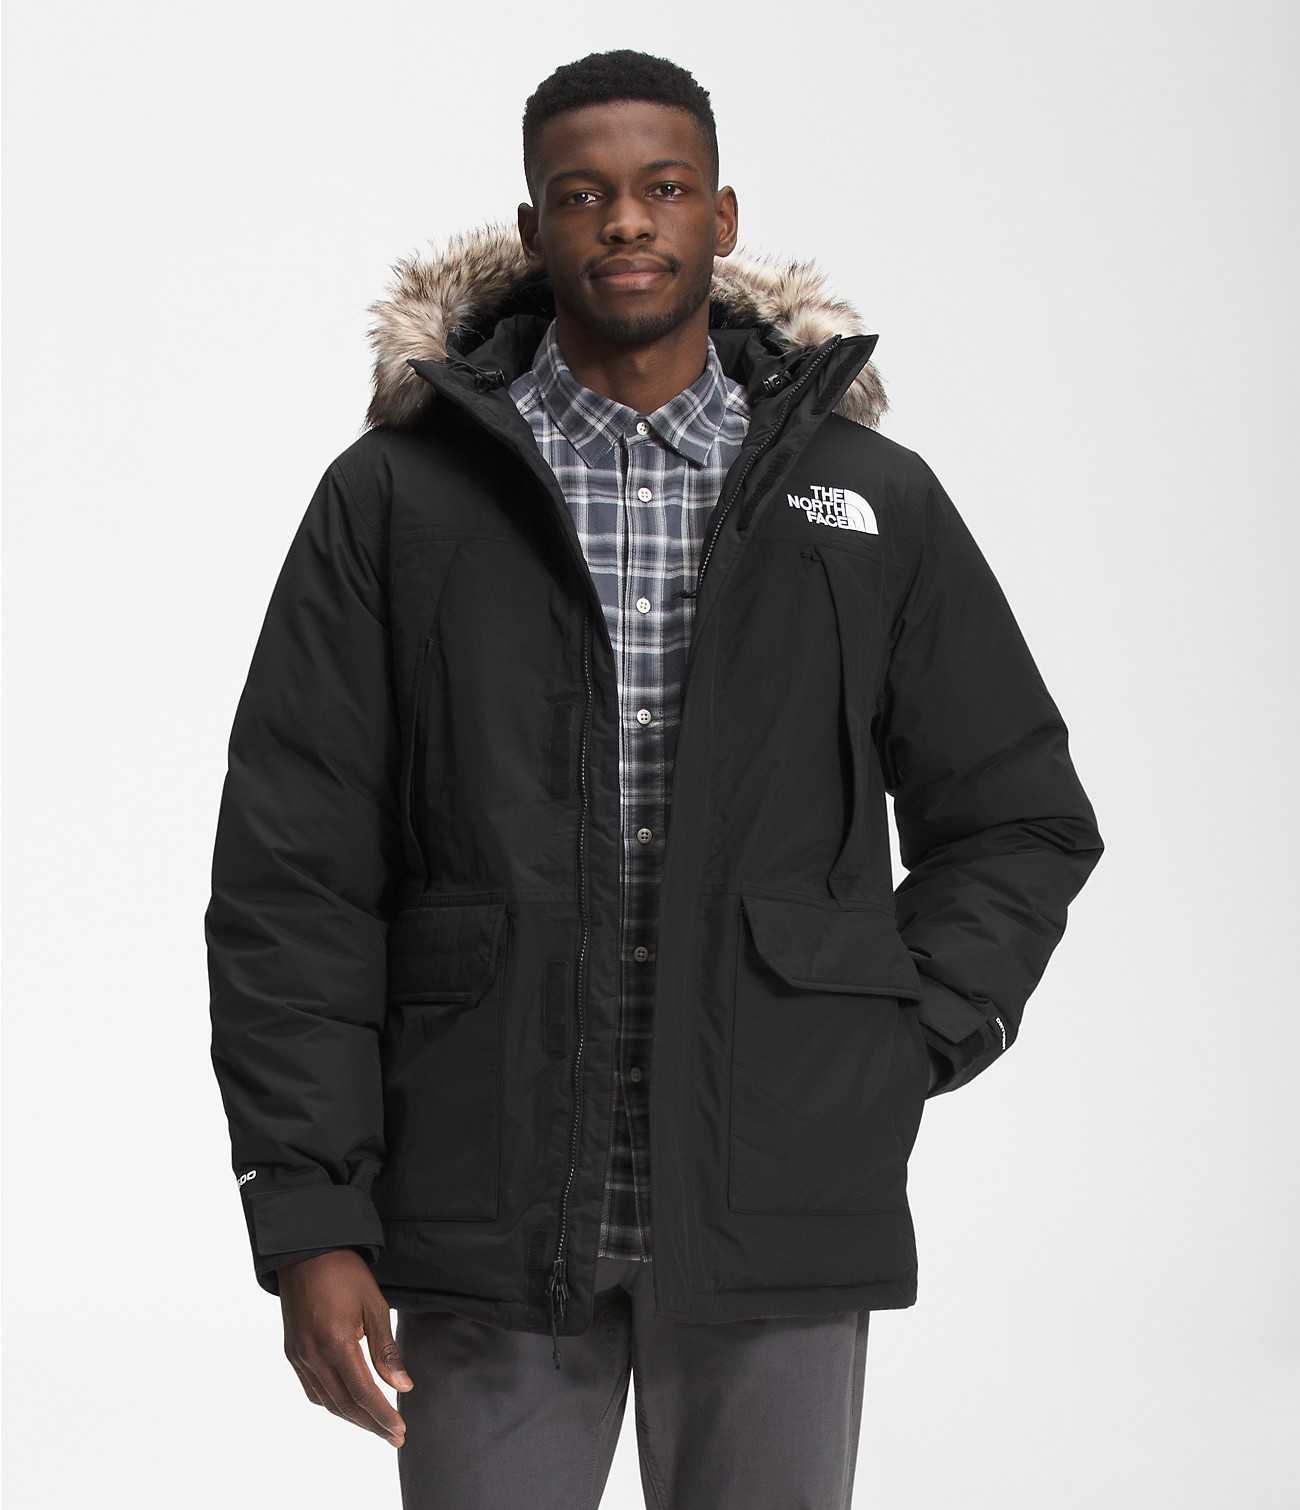 North Face Nuptse Jacket Named Hottest In World By Lyst